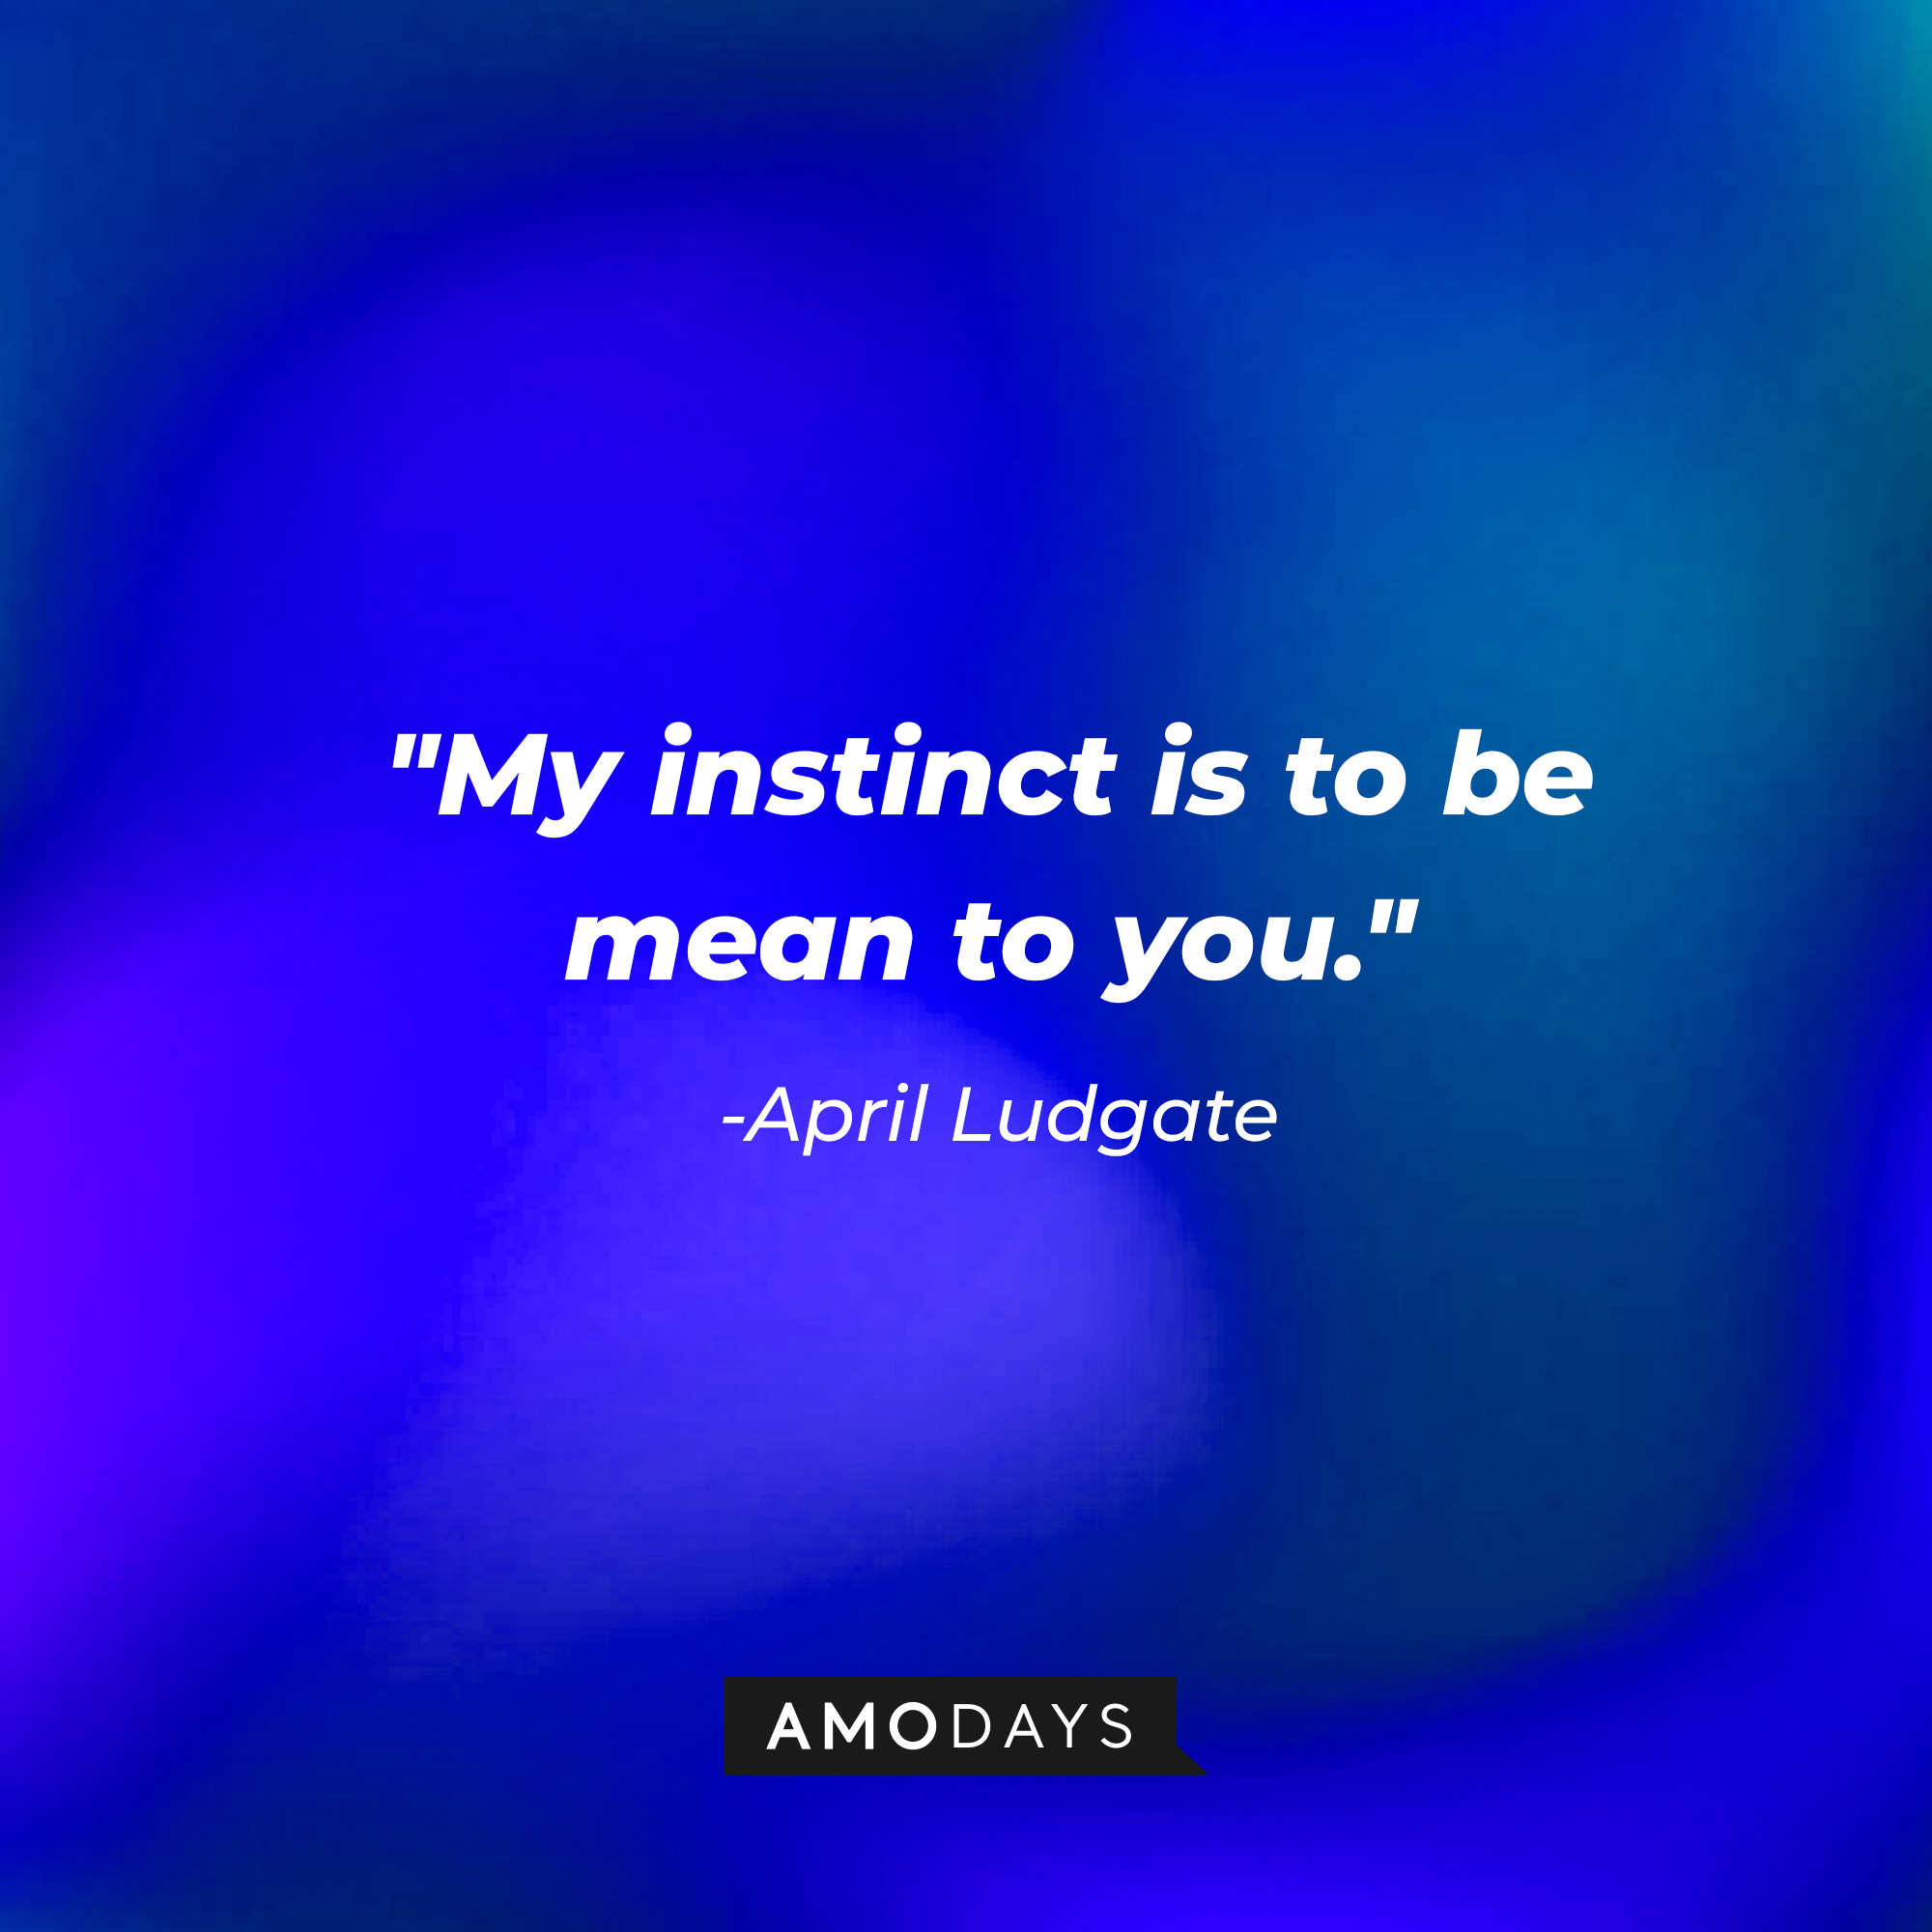 April Ludgate's quote, "My instinct is to be mean to you." | Source: AmoDays